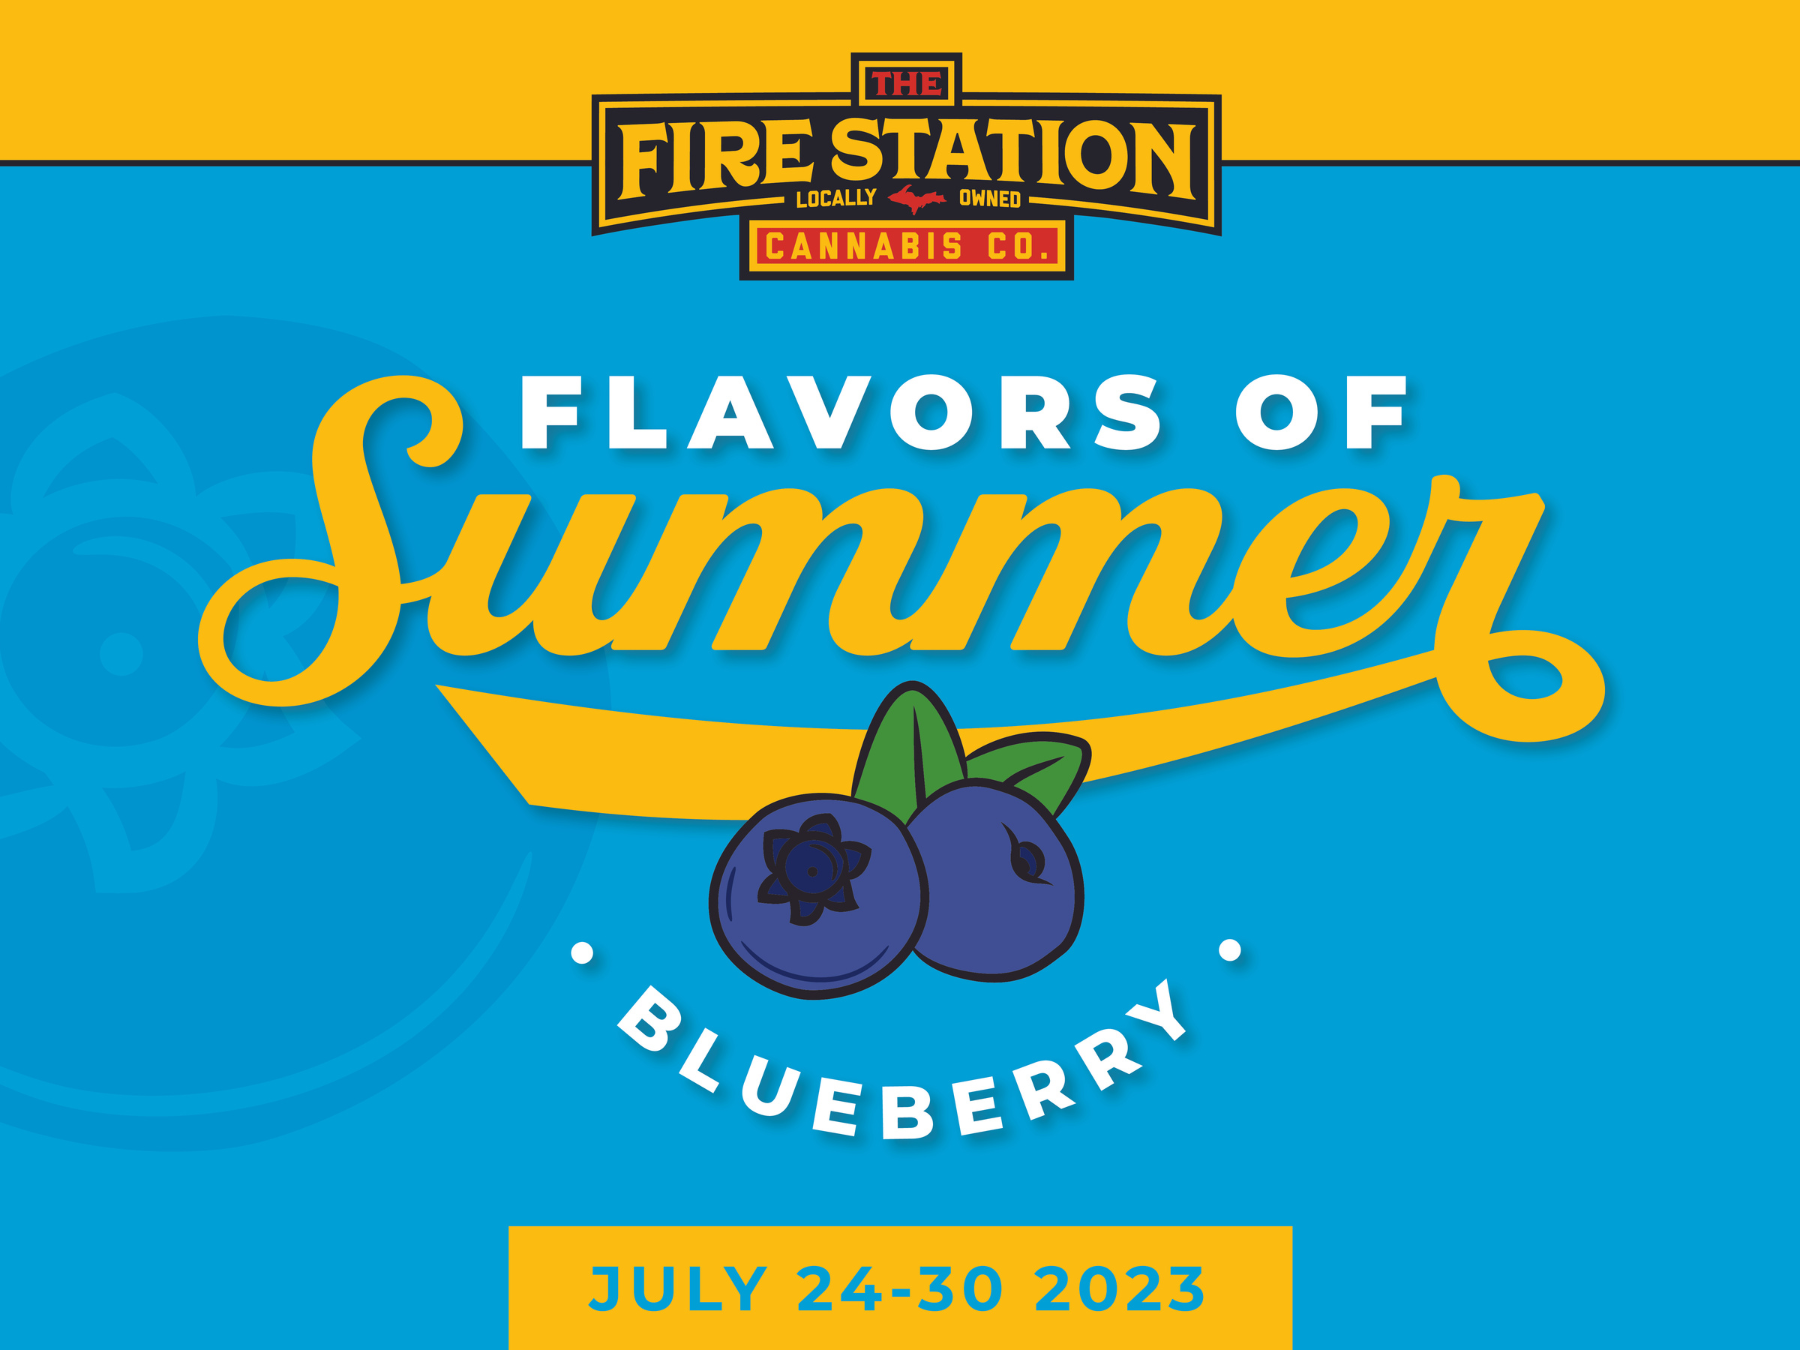 Shop blueberry in The Fire Station's Flavor of Summer sale on edibles.